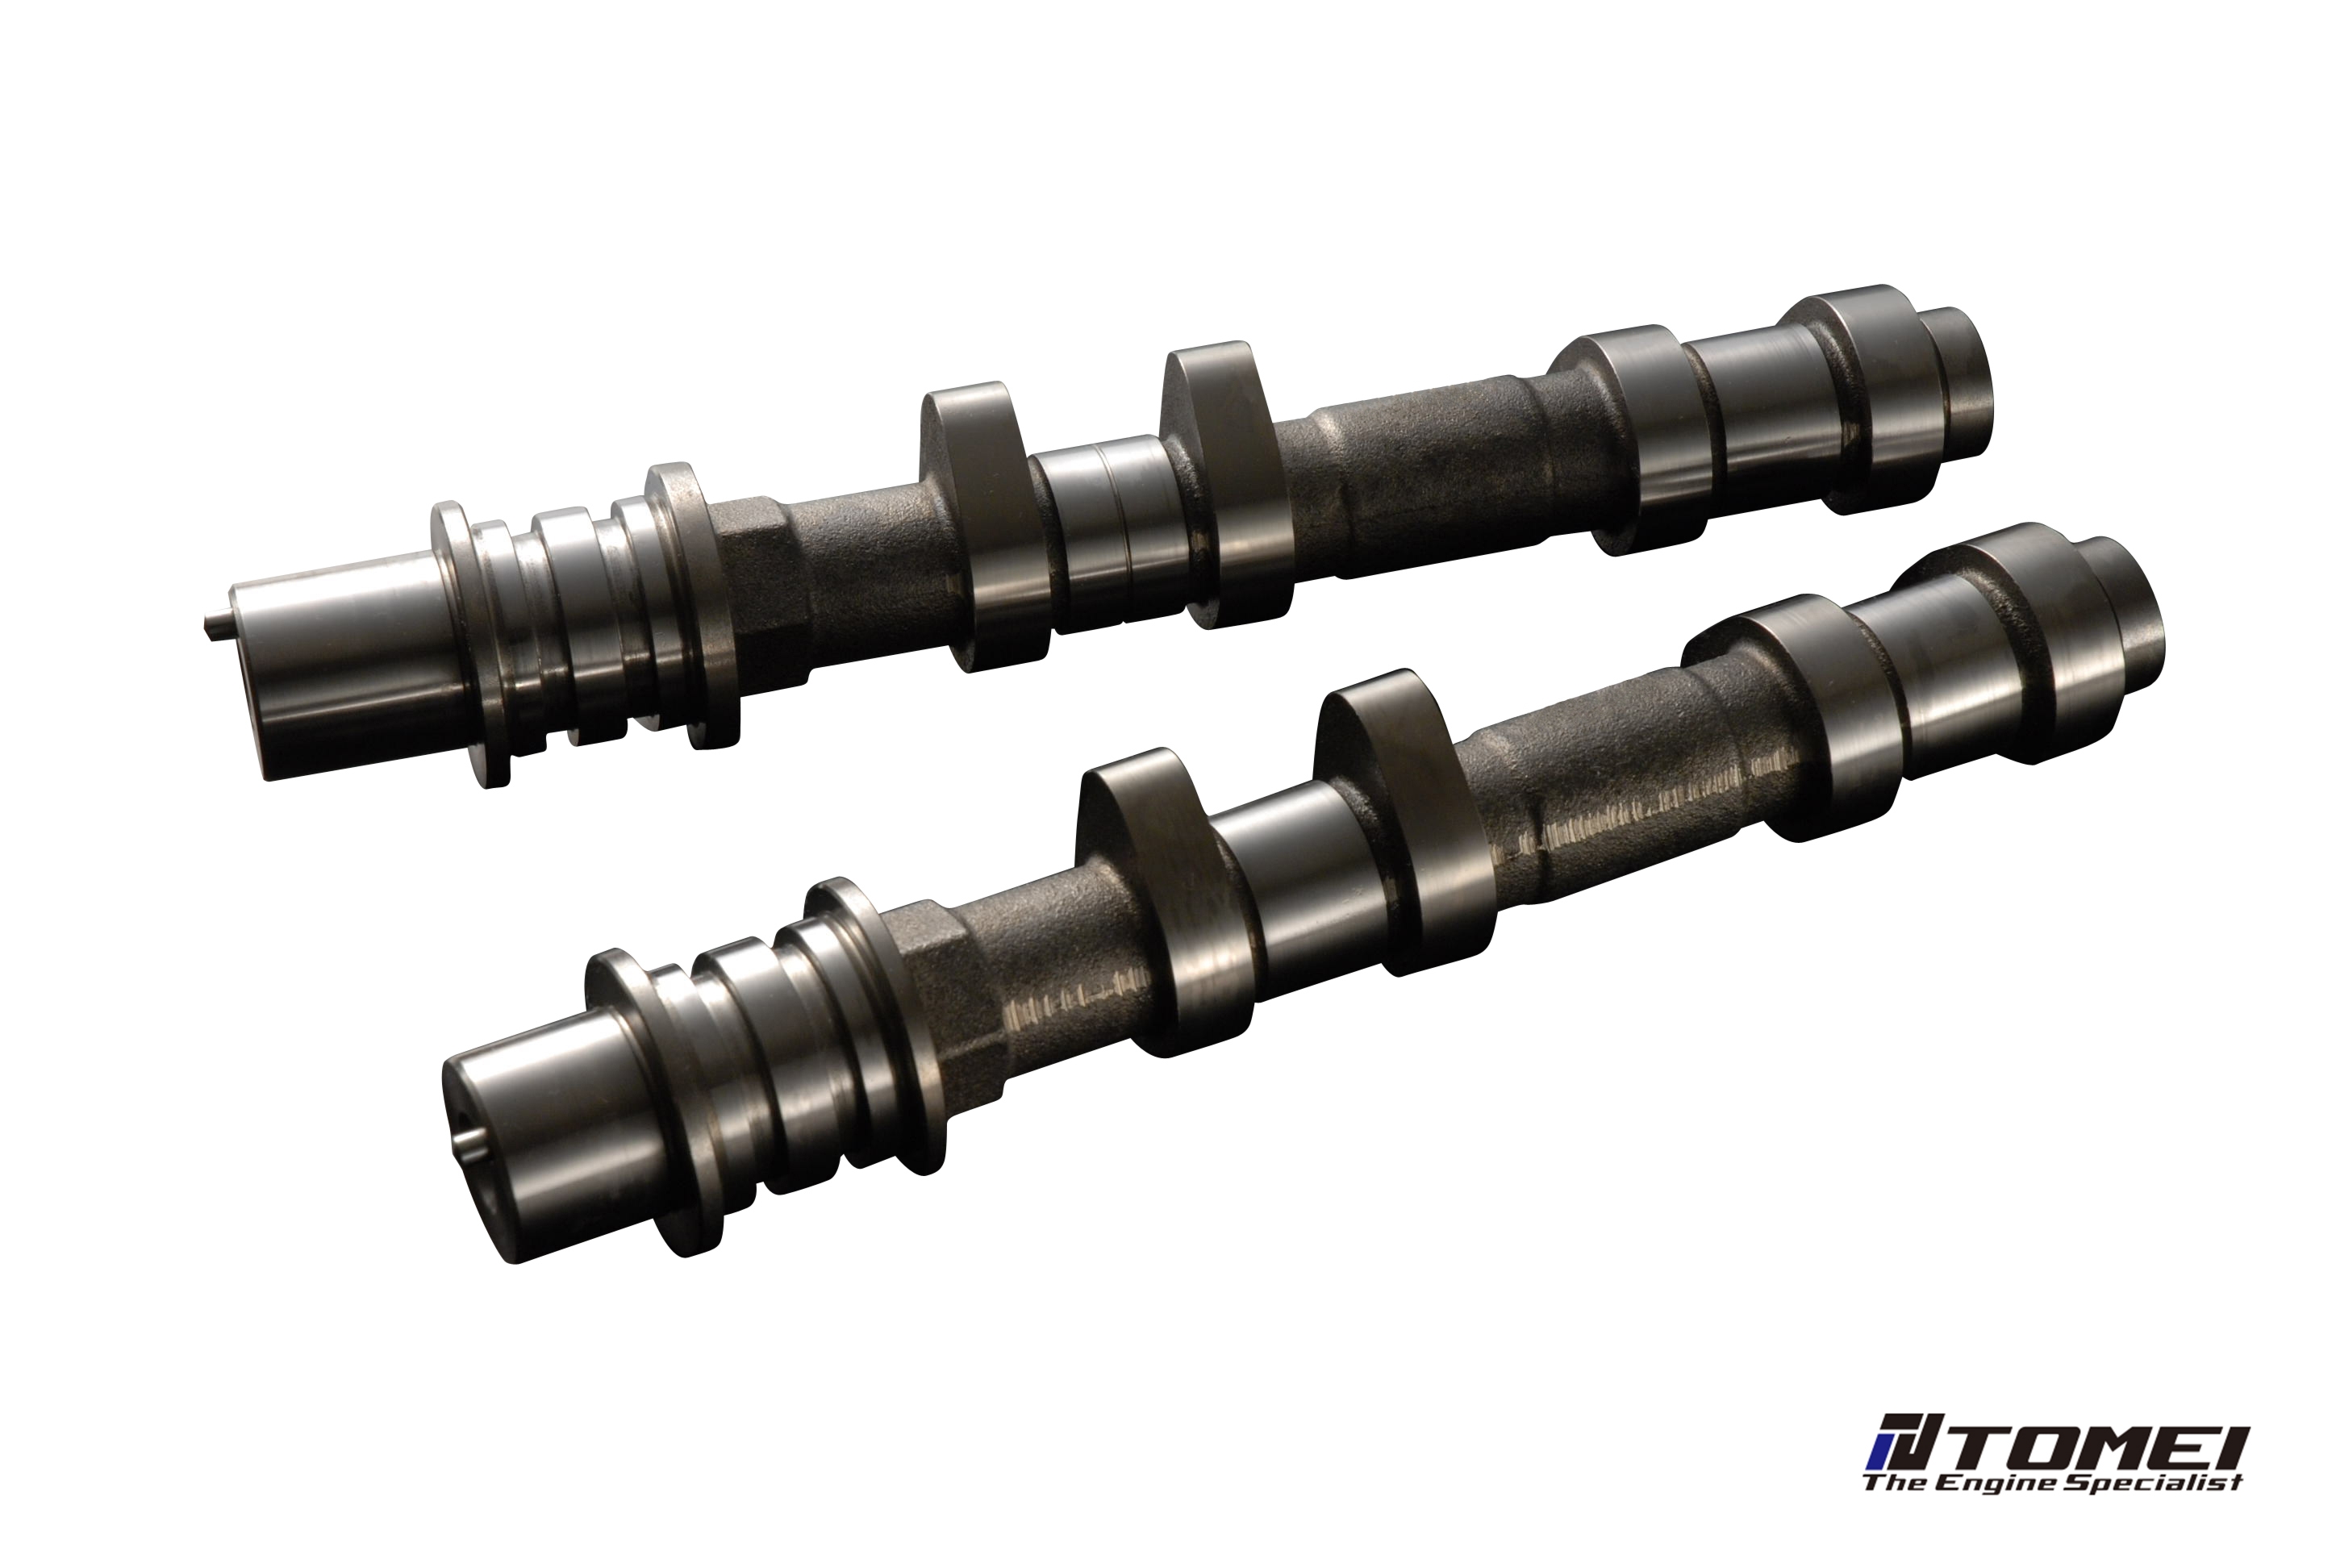 Tomei Camshaft Procam EJ25 Dual AVCS IN 272-10.80 